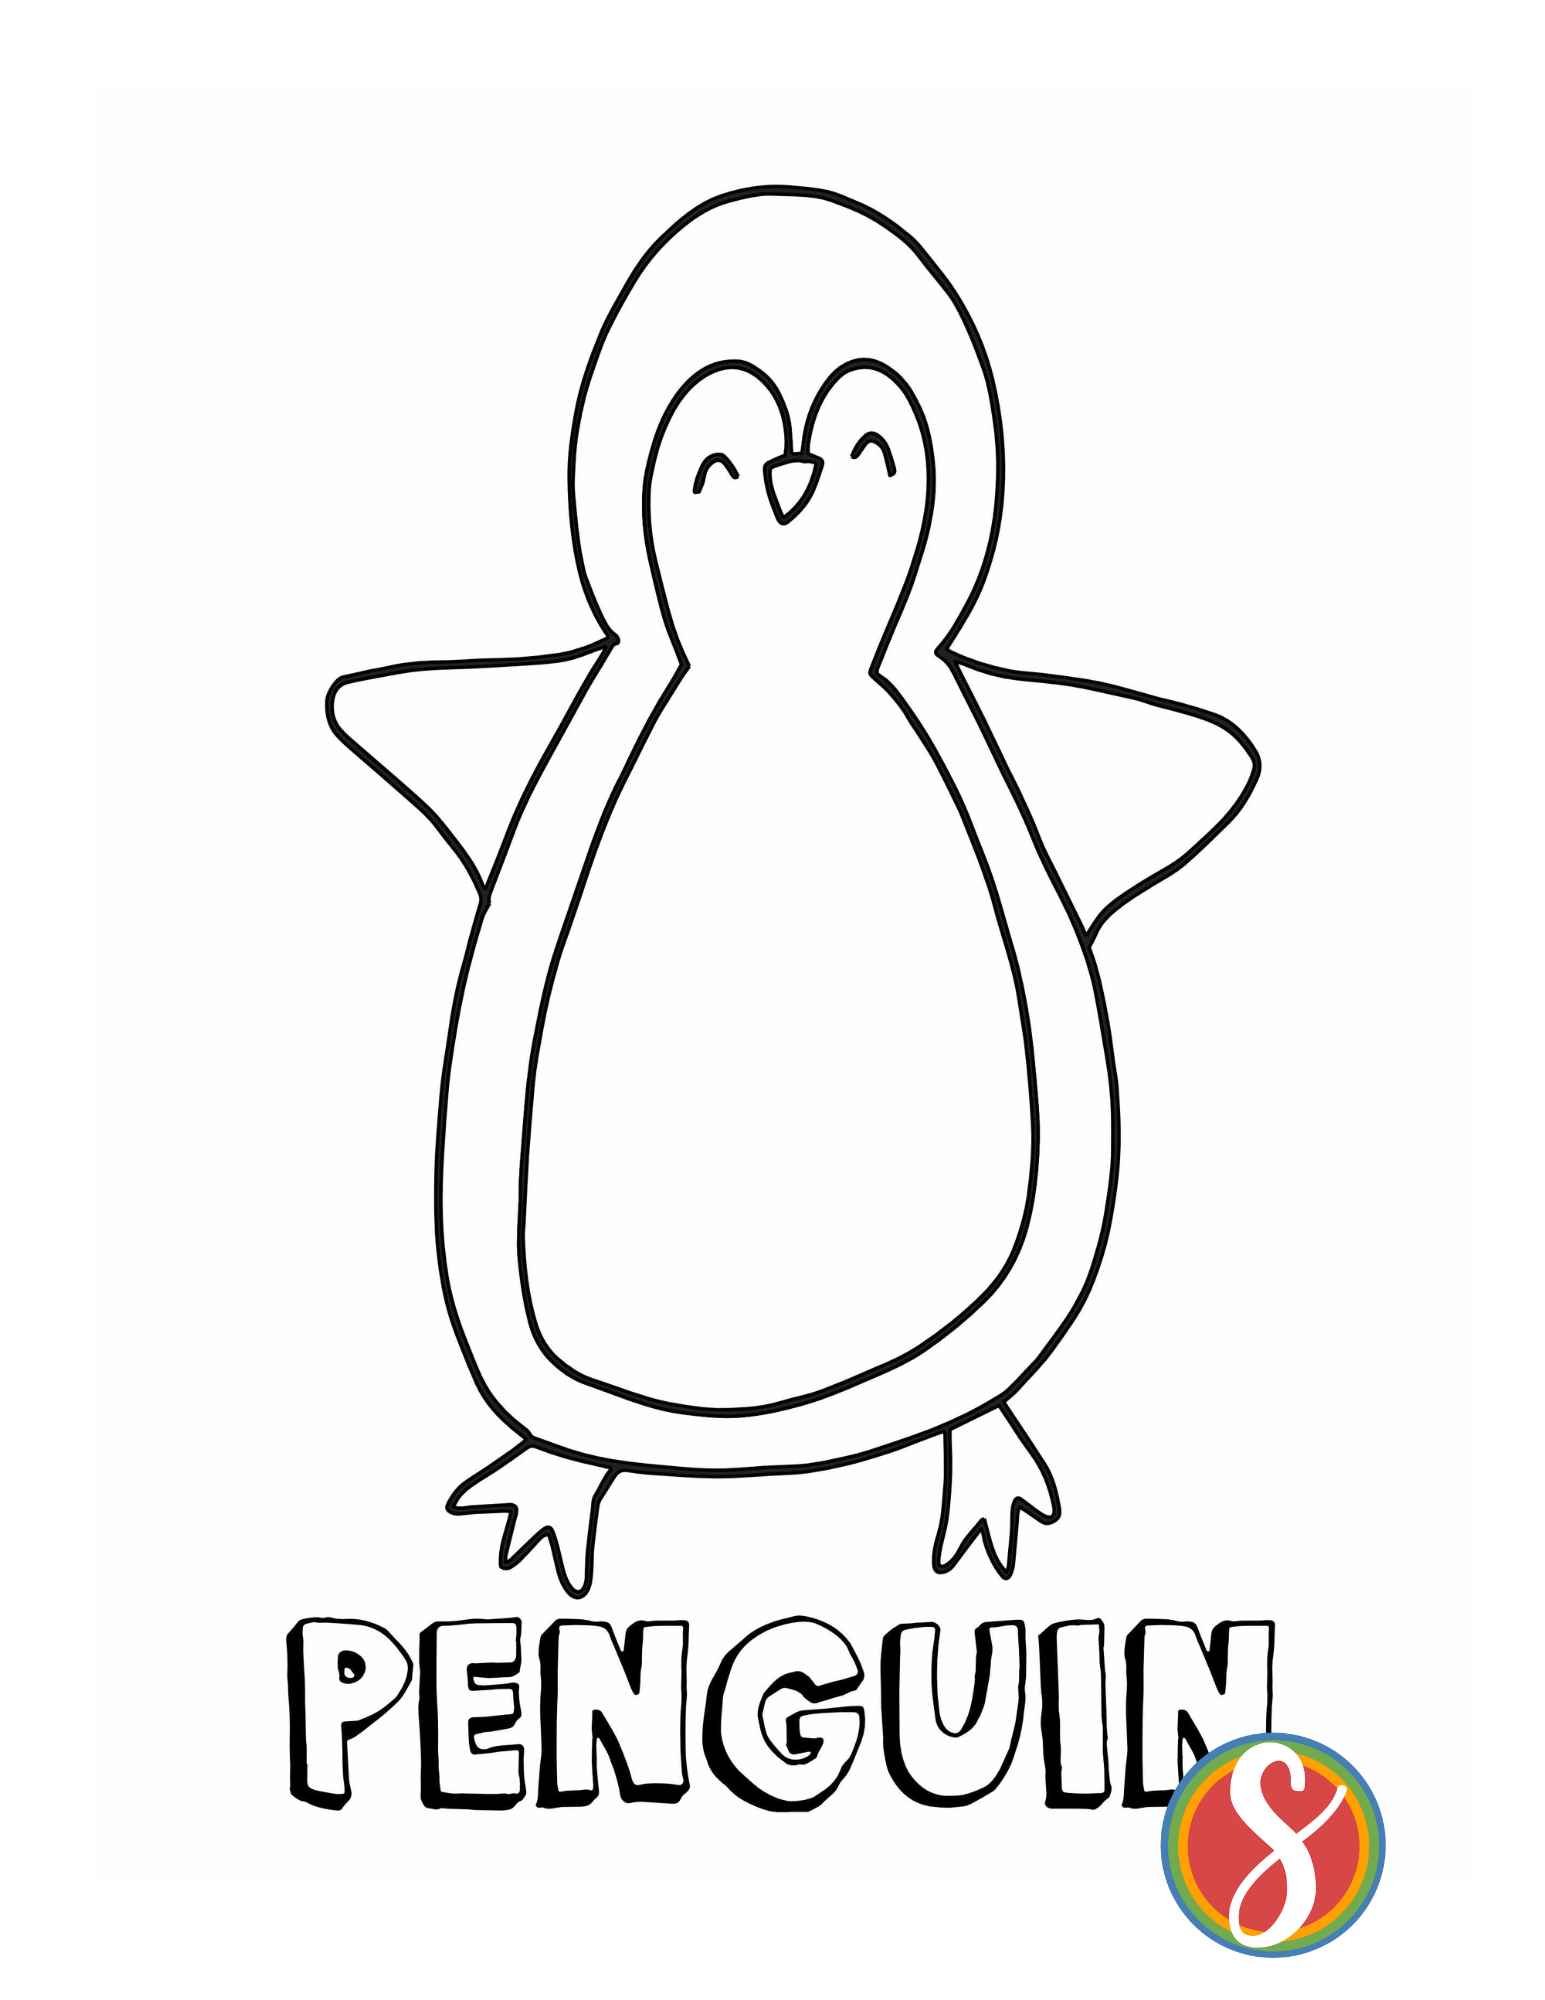 a large, simple penguin coloring image with the colorable word "penguin" underneath